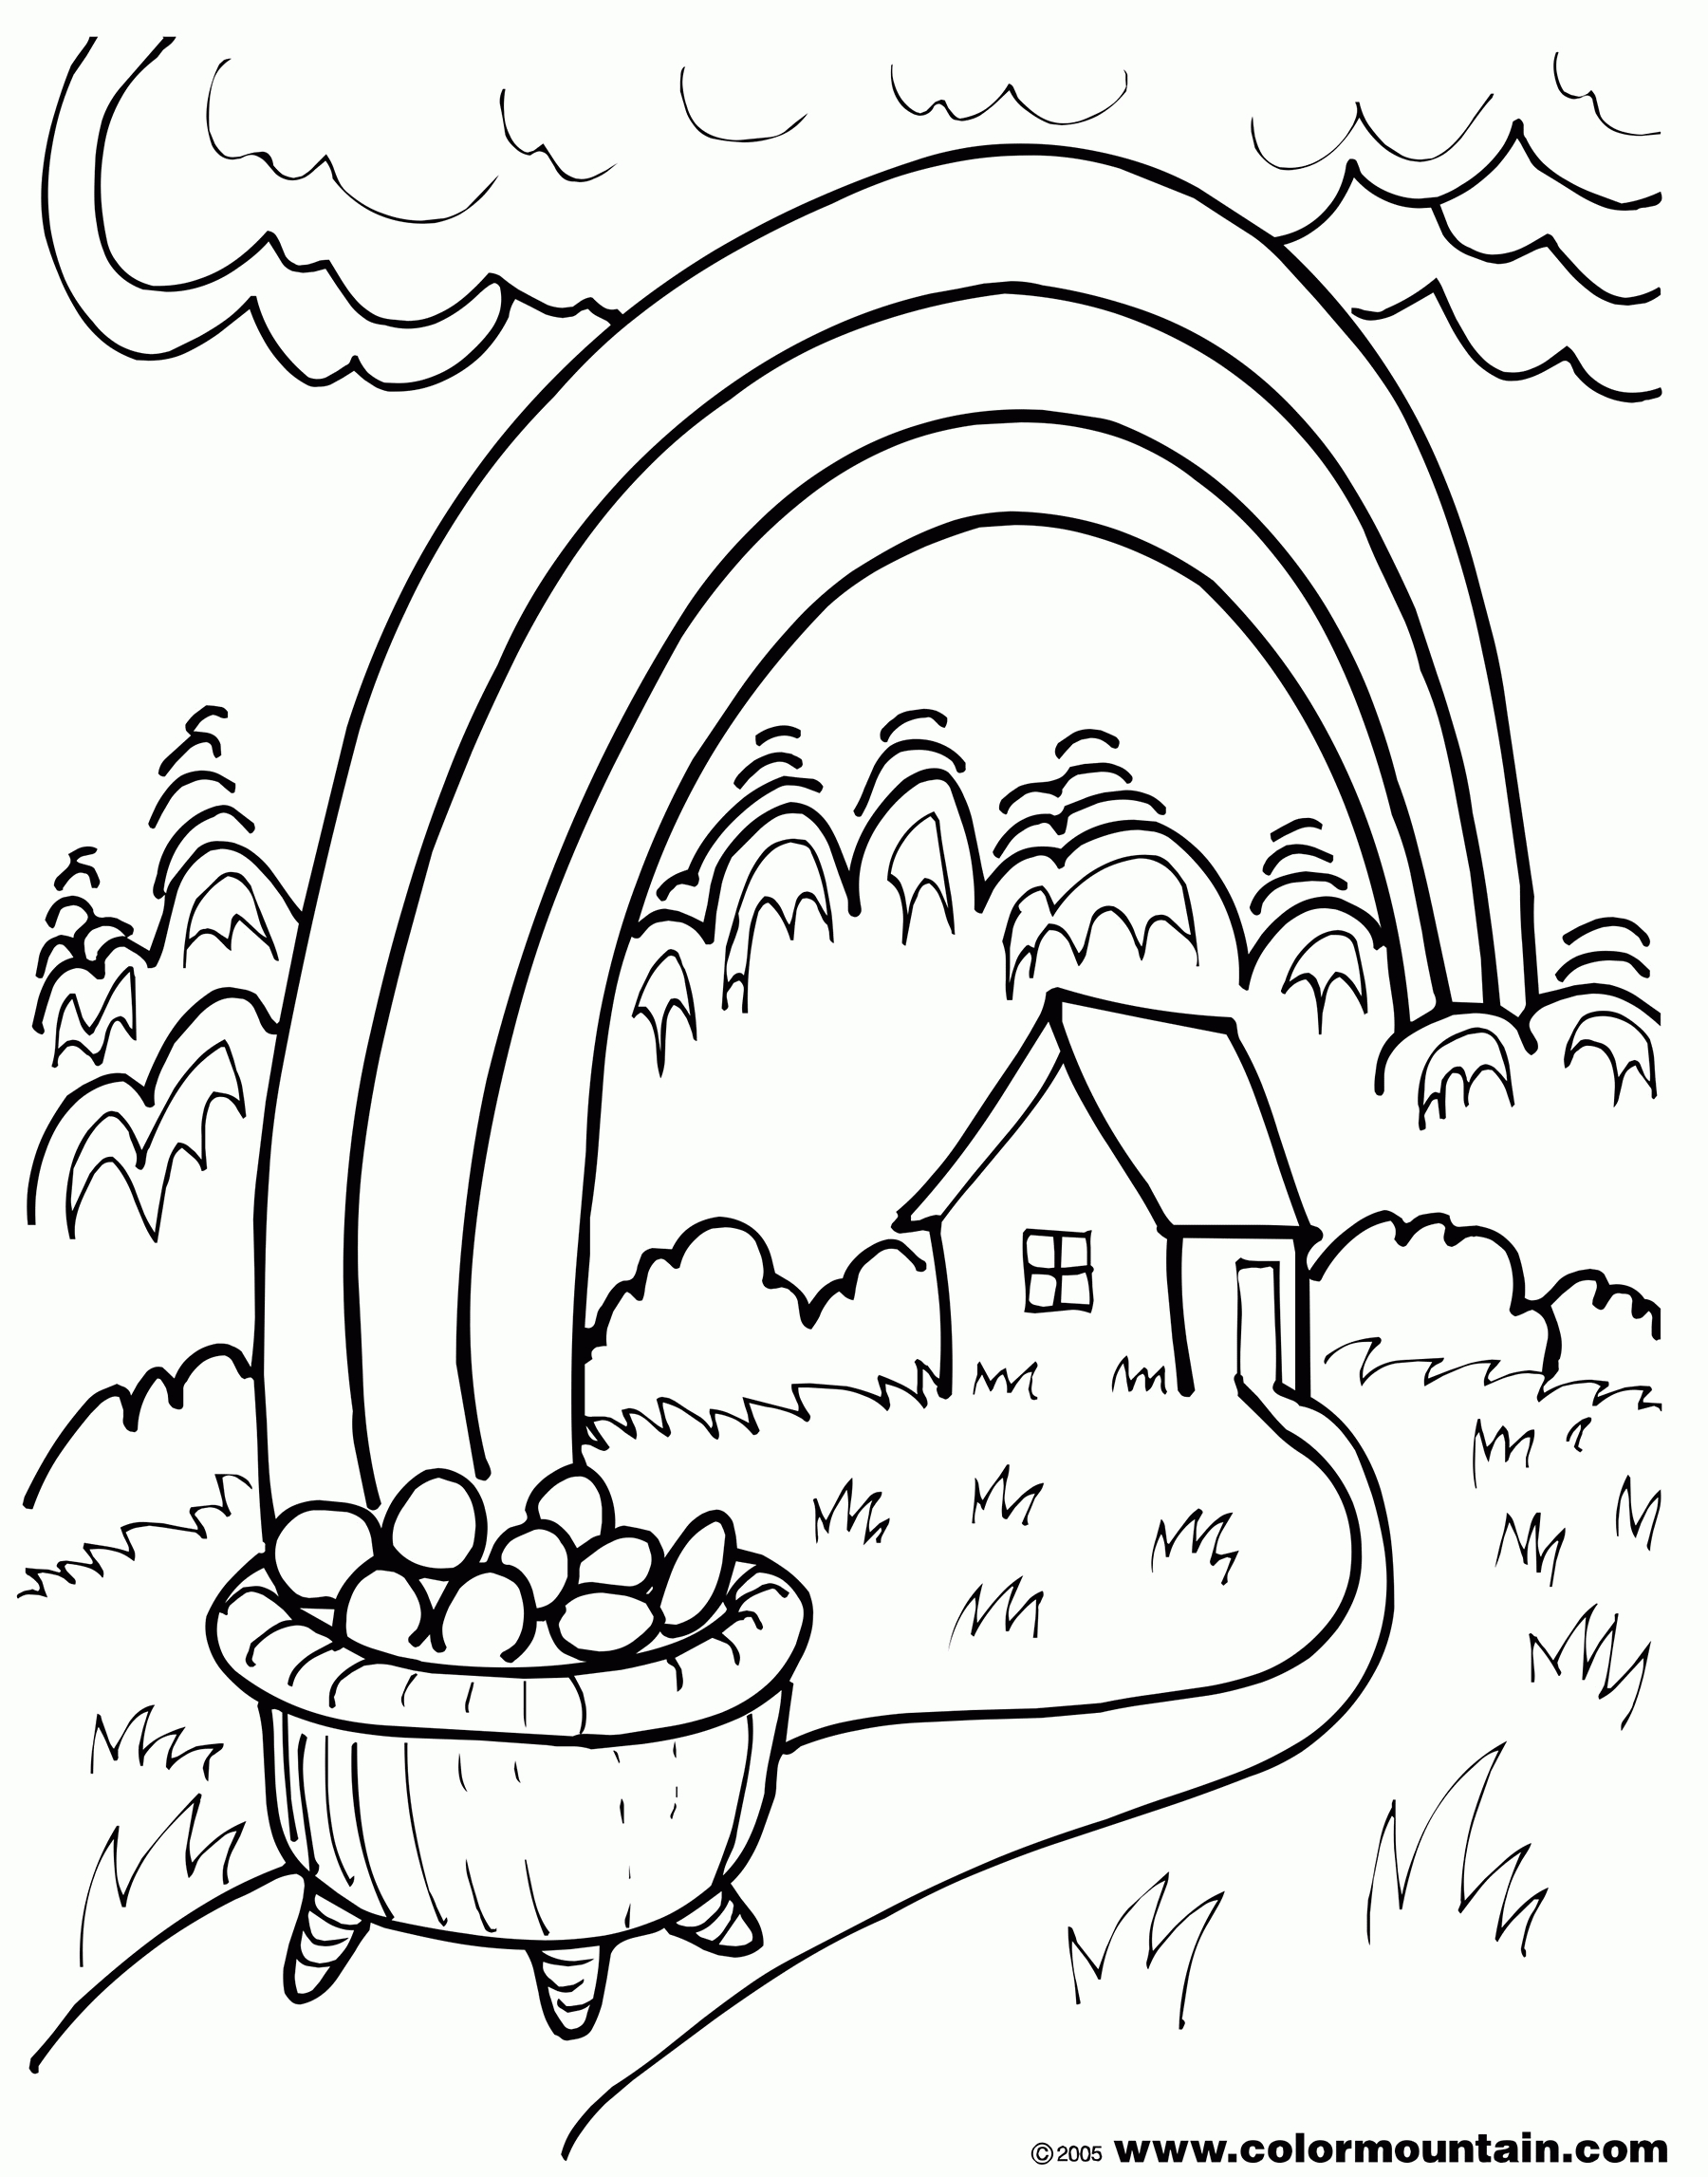 Pot Of Gold Rainbow Coloring Sheet - Create A Printout Or Activity - Free Printable Pot Of Gold Coloring Pages